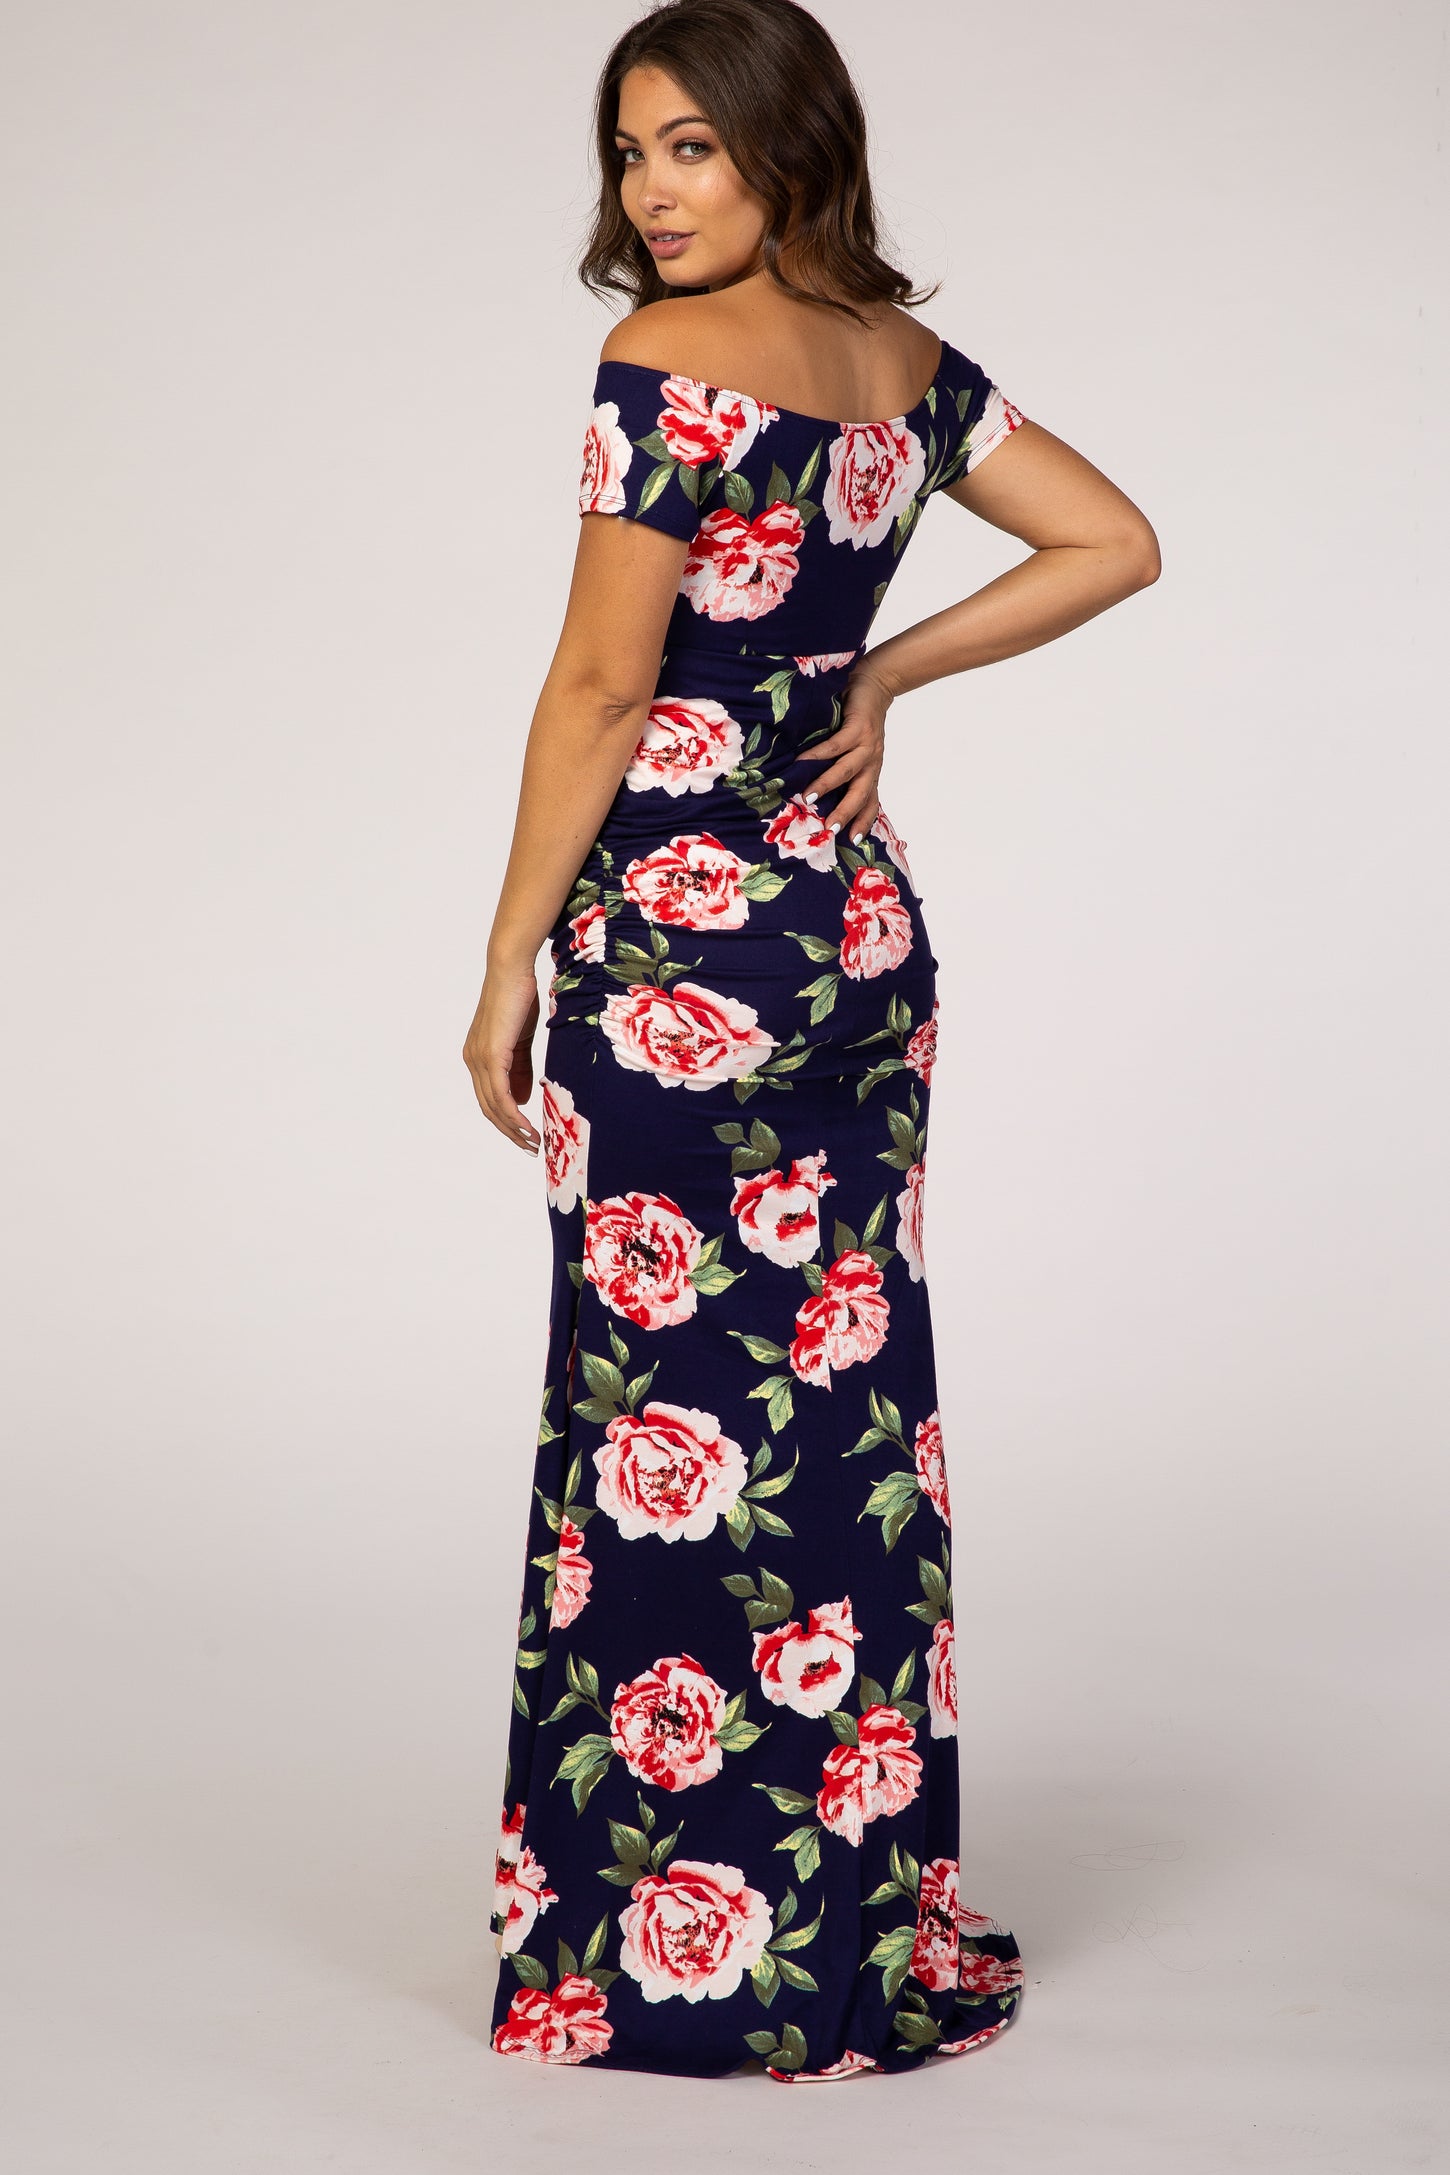 PinkBlush Navy Floral Off Shoulder Wrap Maternity Photoshoot Gown/Dress